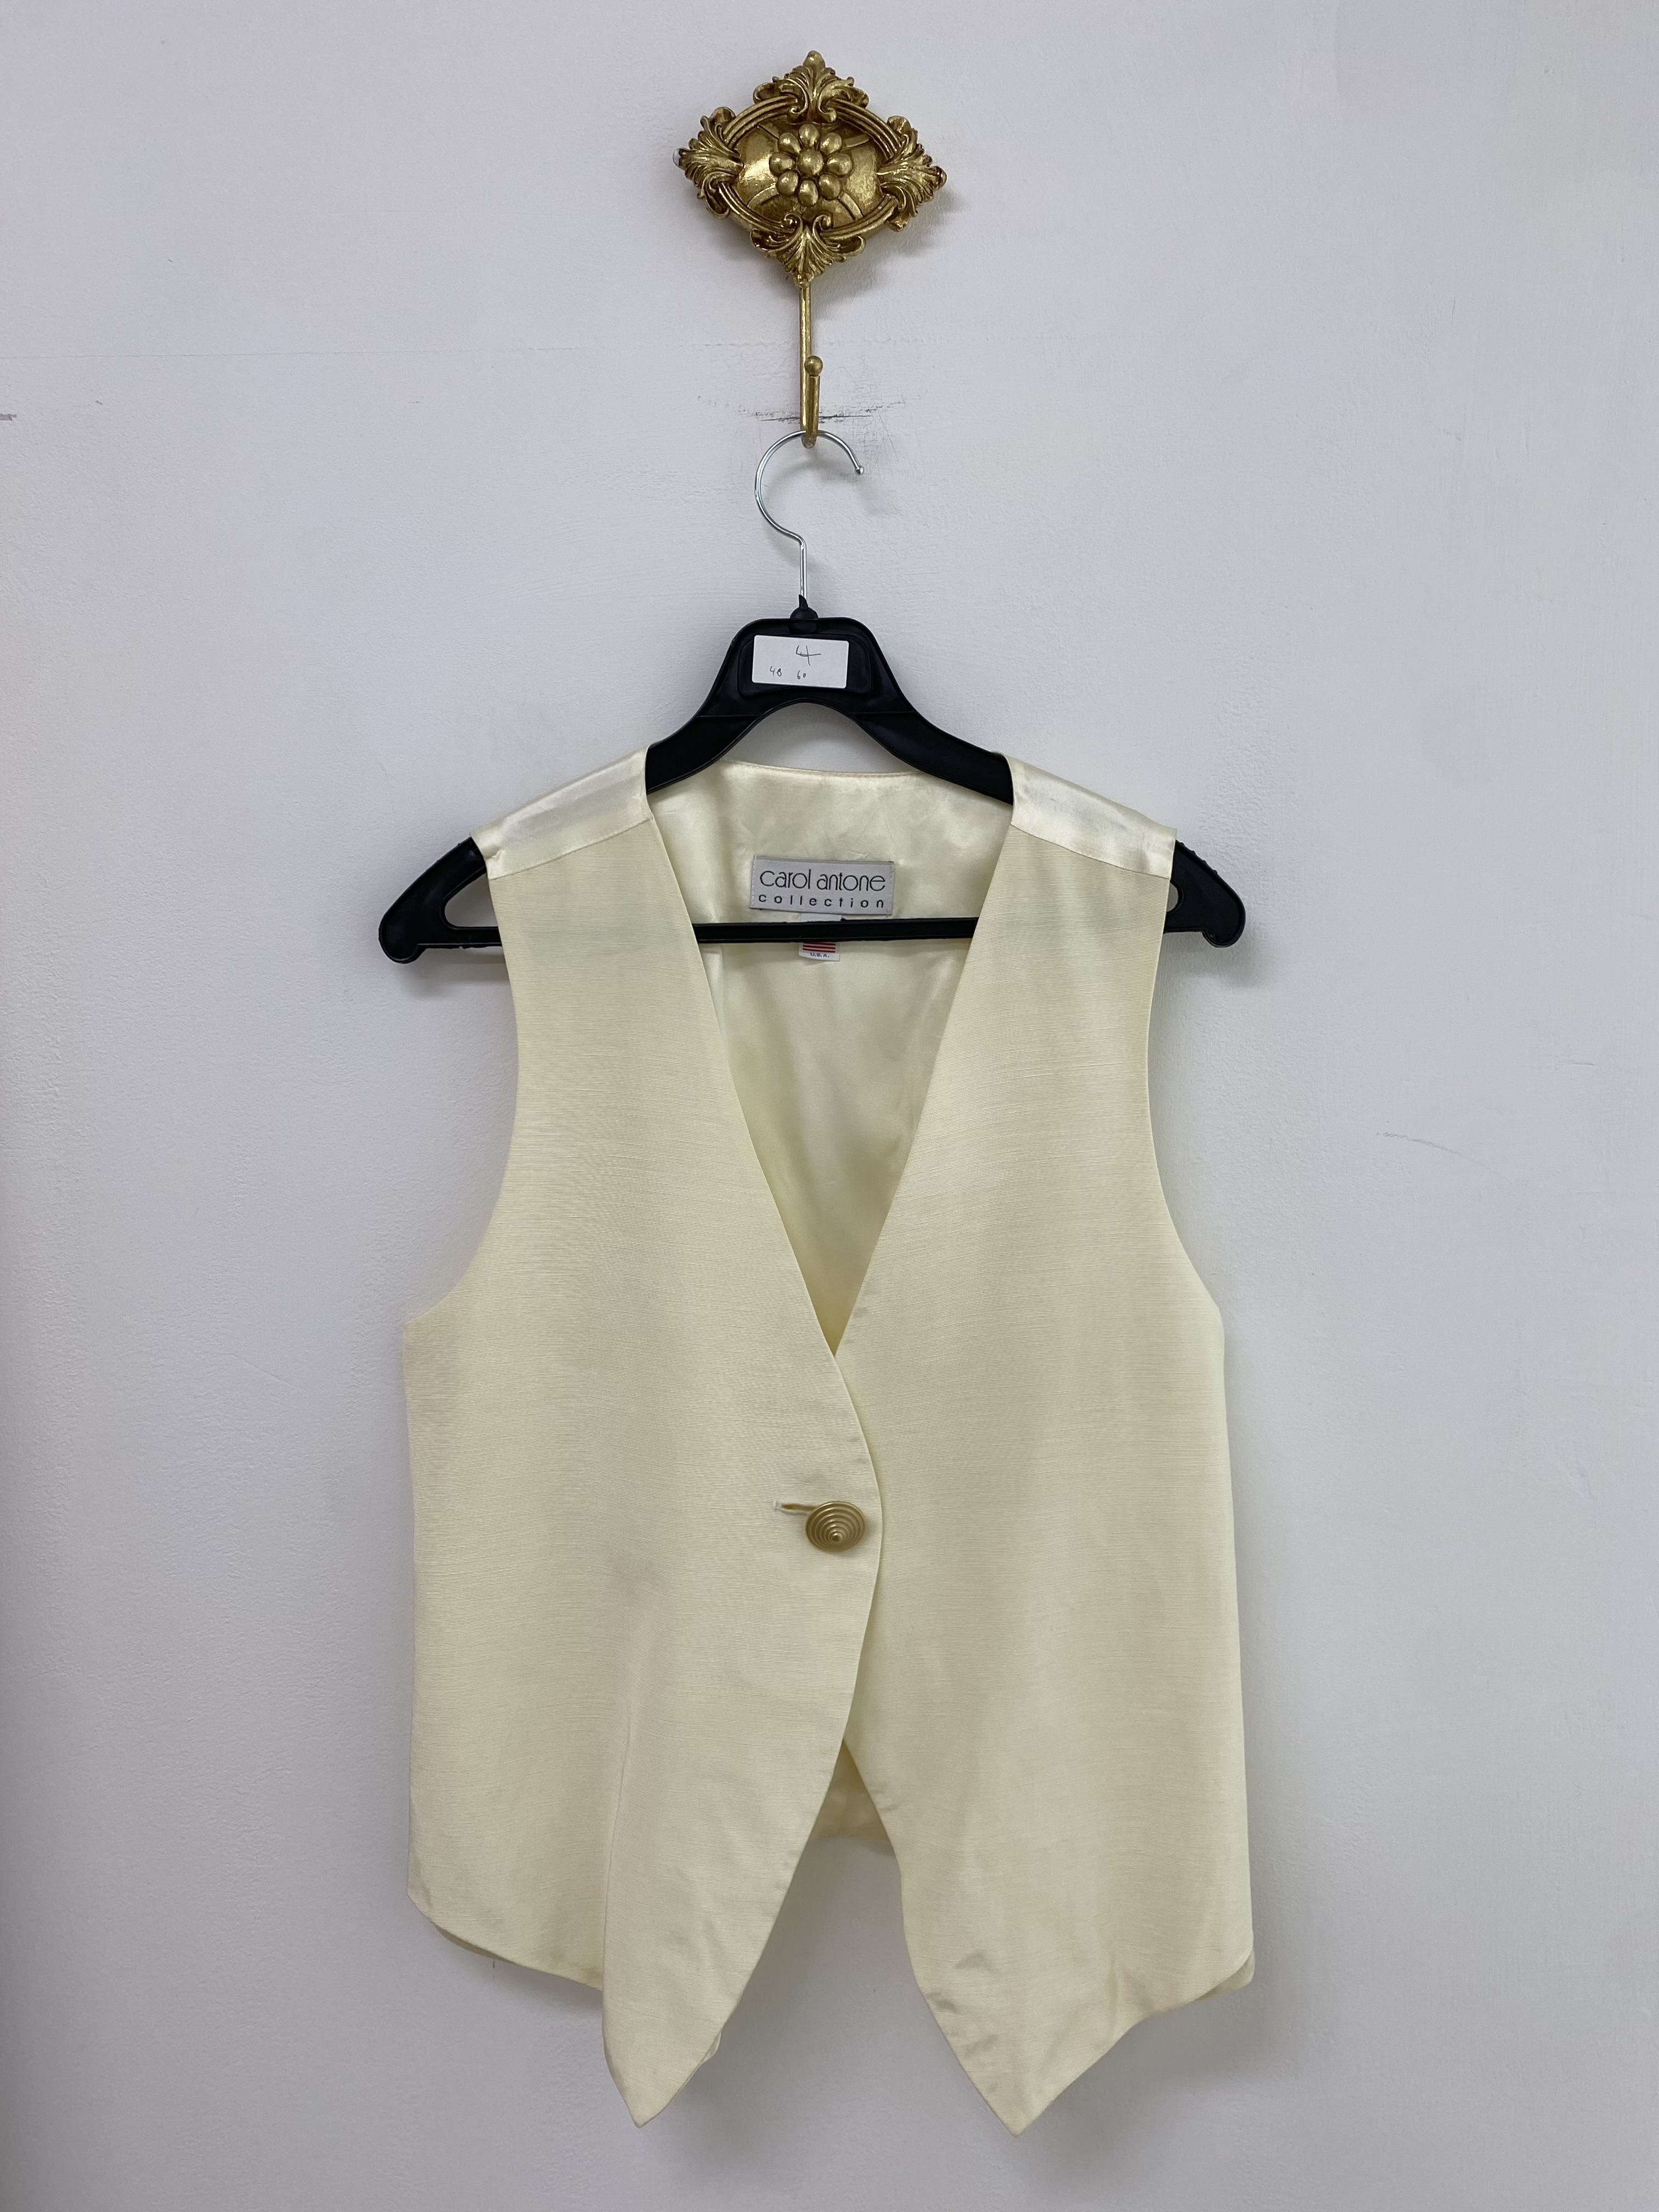 Ivory single button vest (made in u.s.a.)